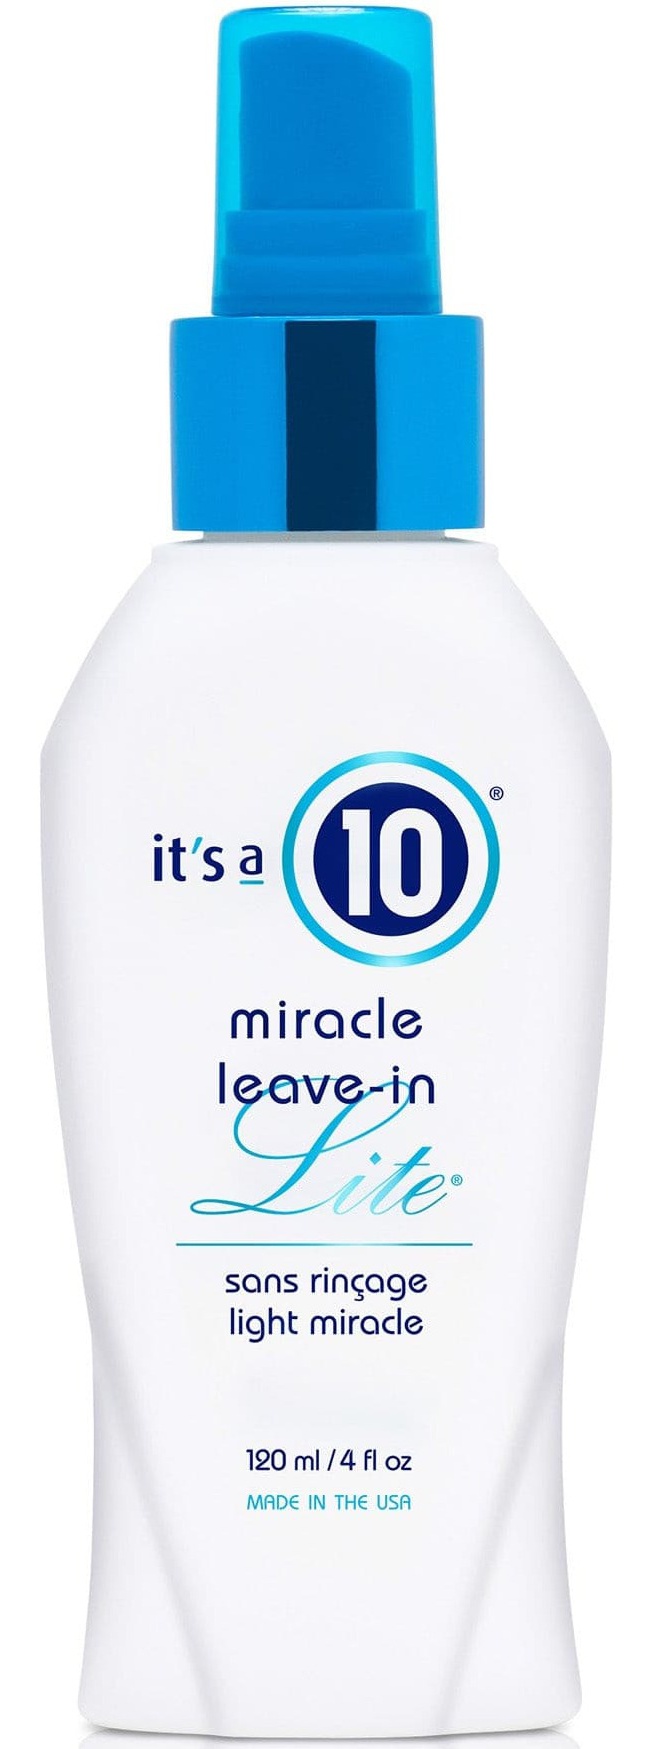 It's a 10 Miracle Leave-it Lite